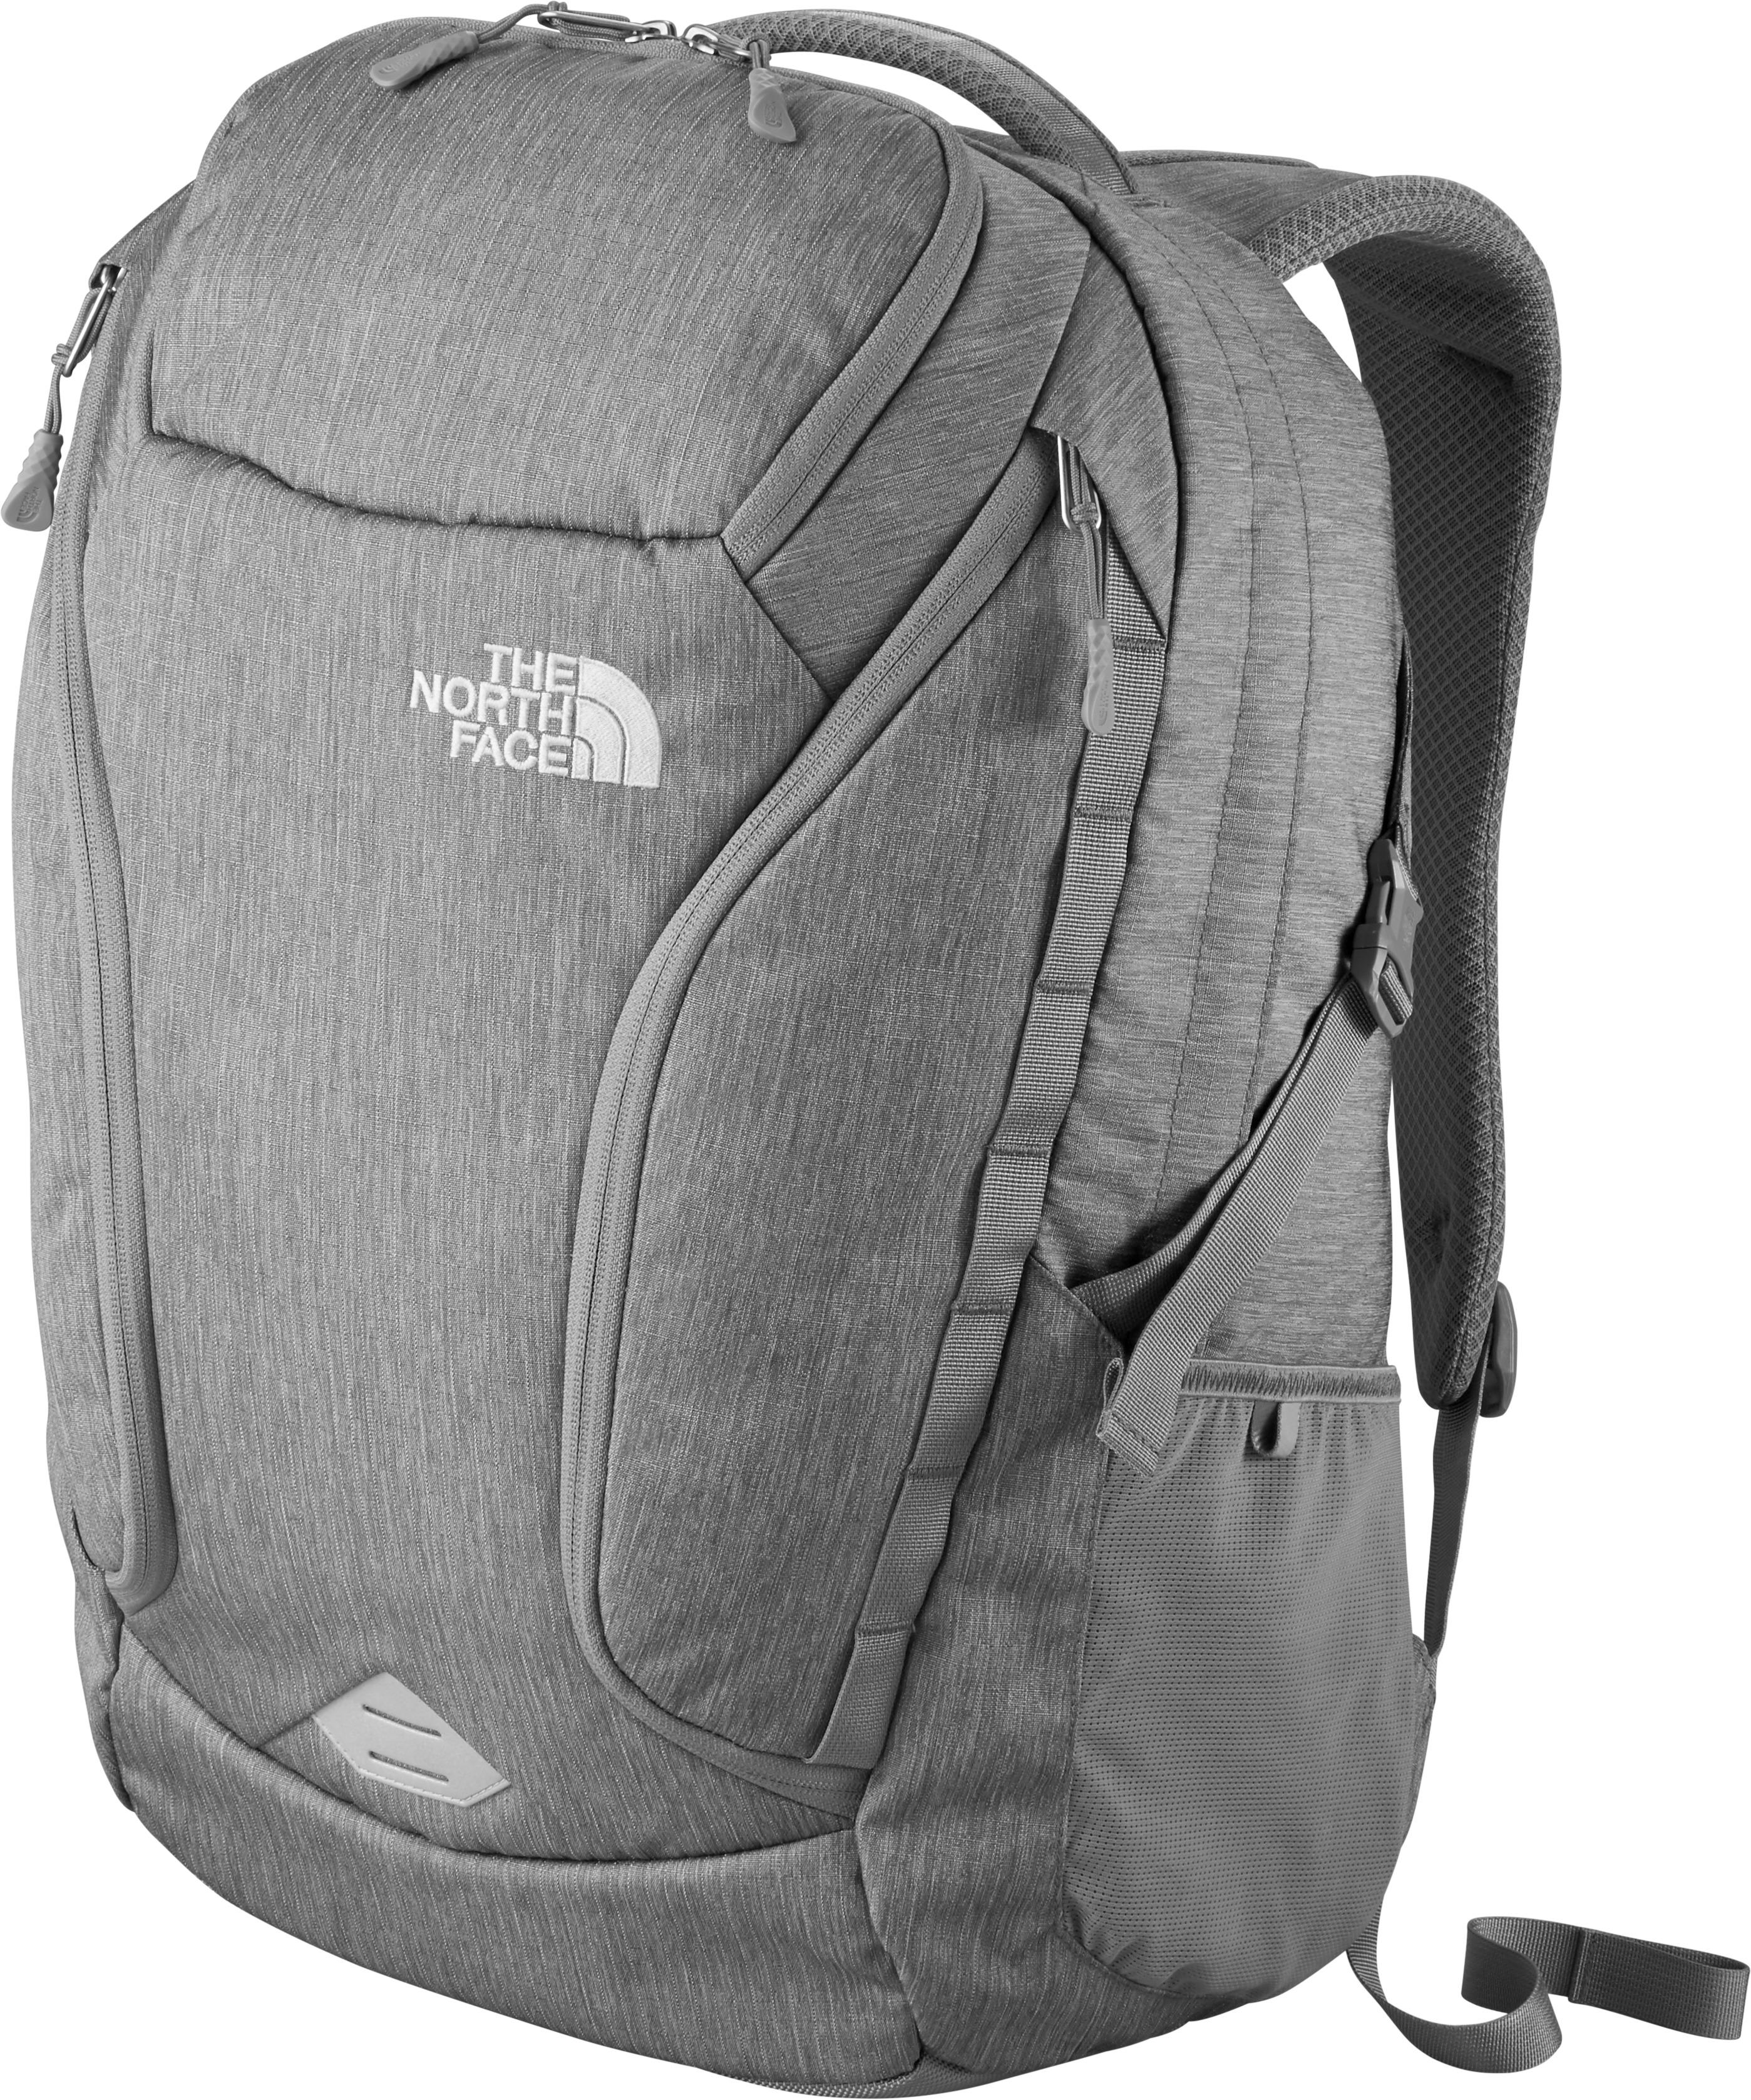 north face mainframe review